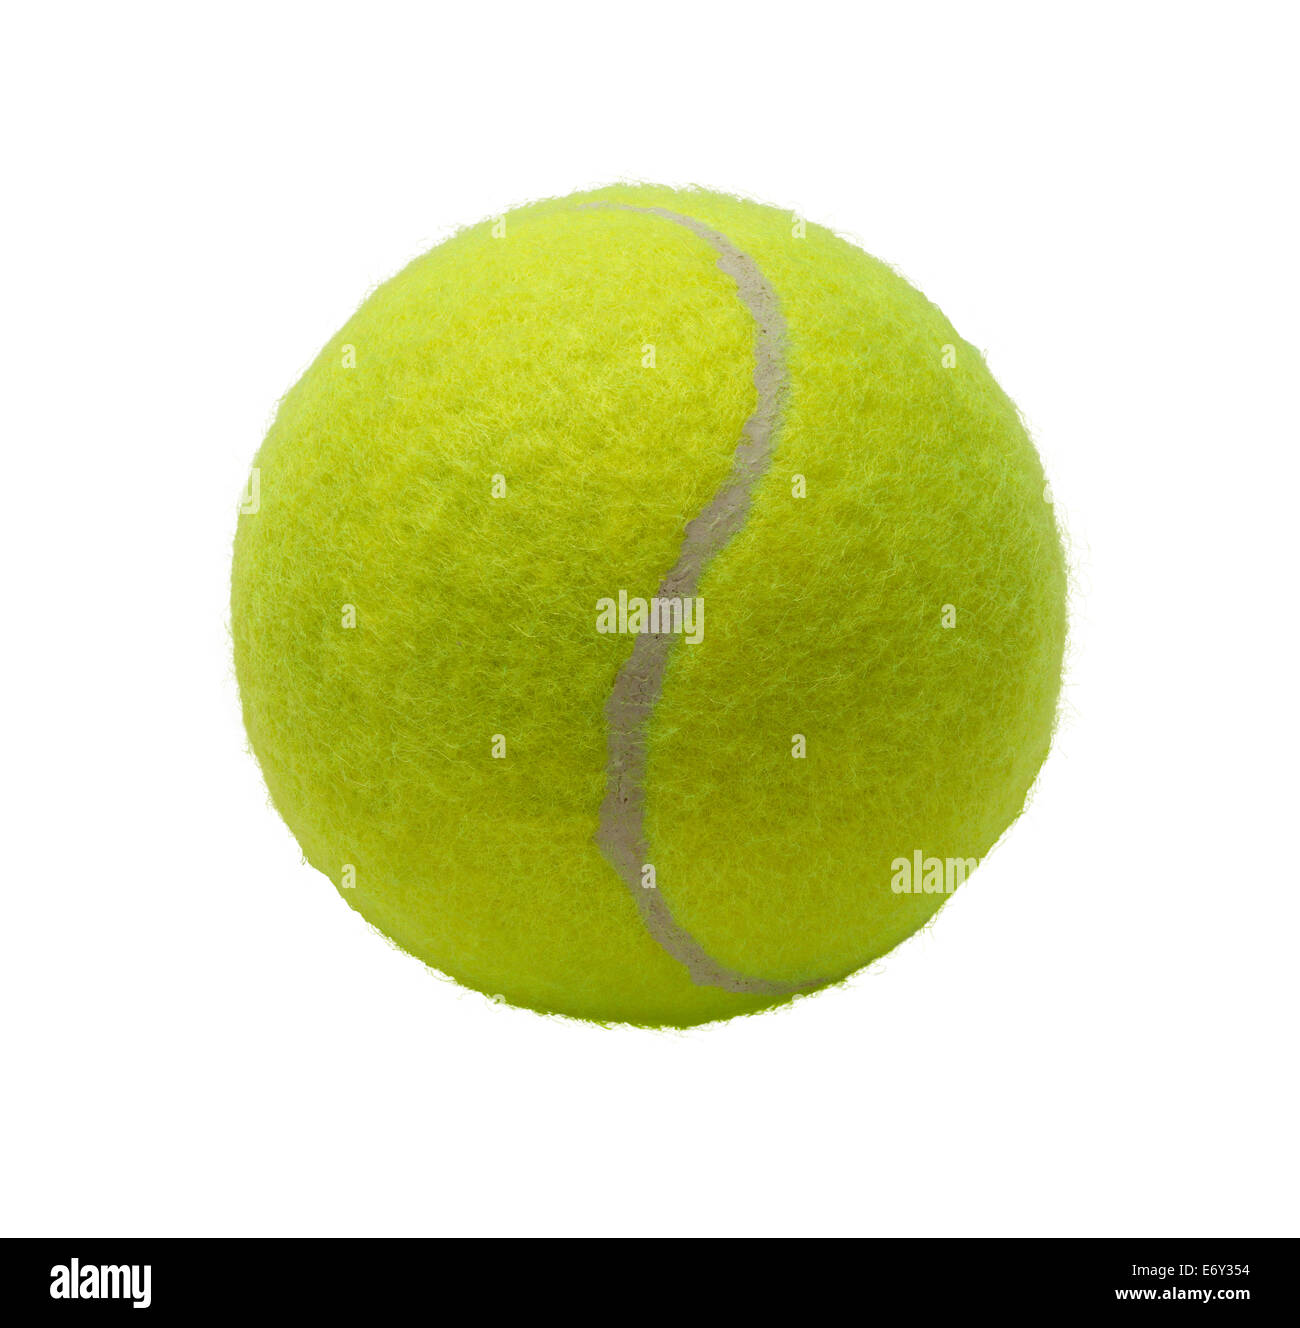 Green Tennis Ball Isolated on White Background. Stock Photo